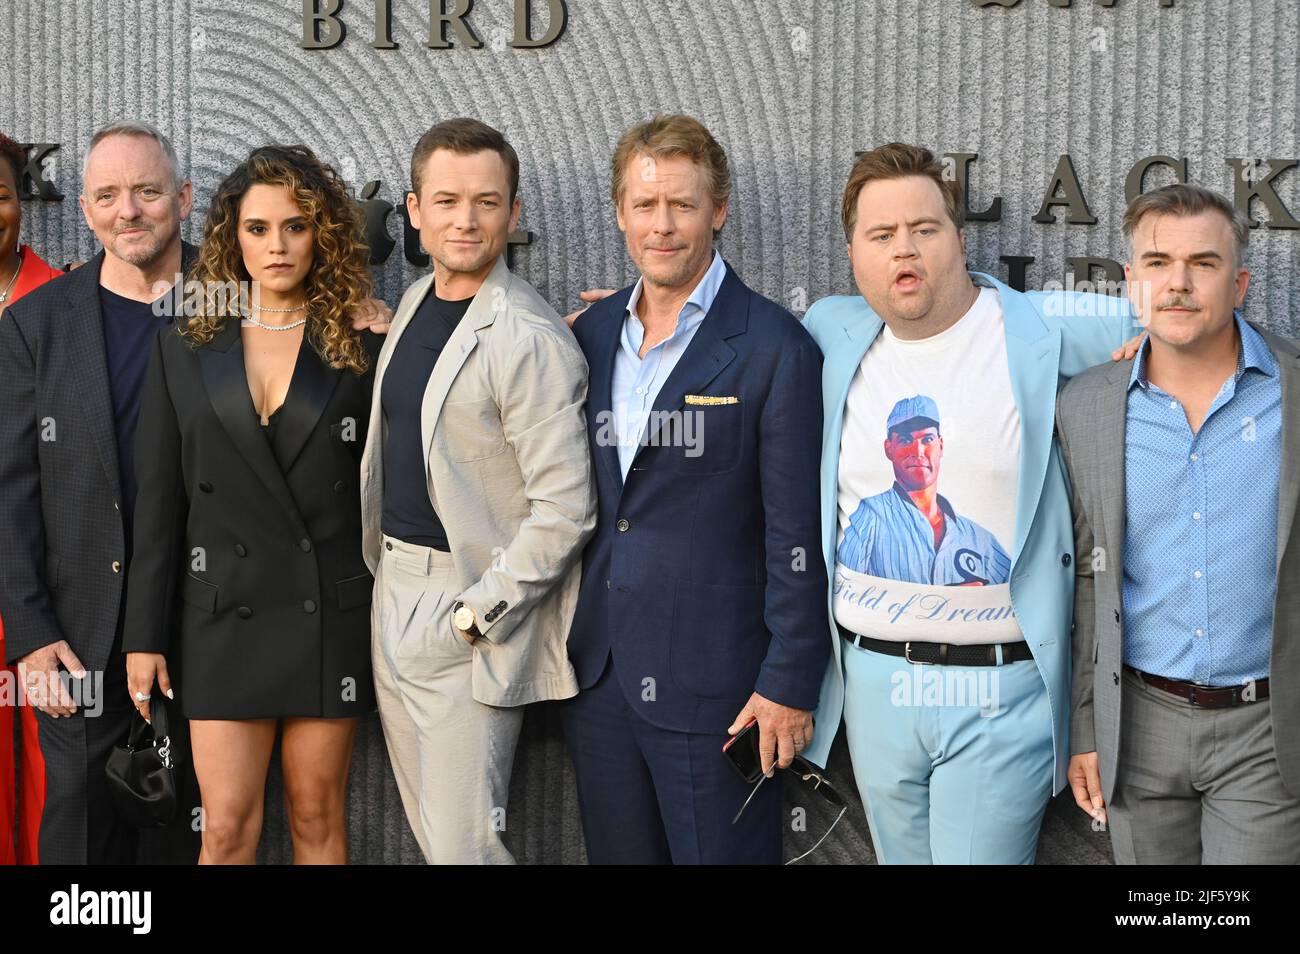 Los Angeles, USA. 29th June, 2022. LOS ANGELES, USA. June 29, 2022: Dennis Lehane, Sepideh Moafi, Taron Egerton, Greg Kinnear, Paul Walter Hauser & Cullen Moss at the premiere of Apple TV's Black Bird at the Bruin Theatre, Westwood. Picture Credit: Paul Smith/Alamy Live News Stock Photo